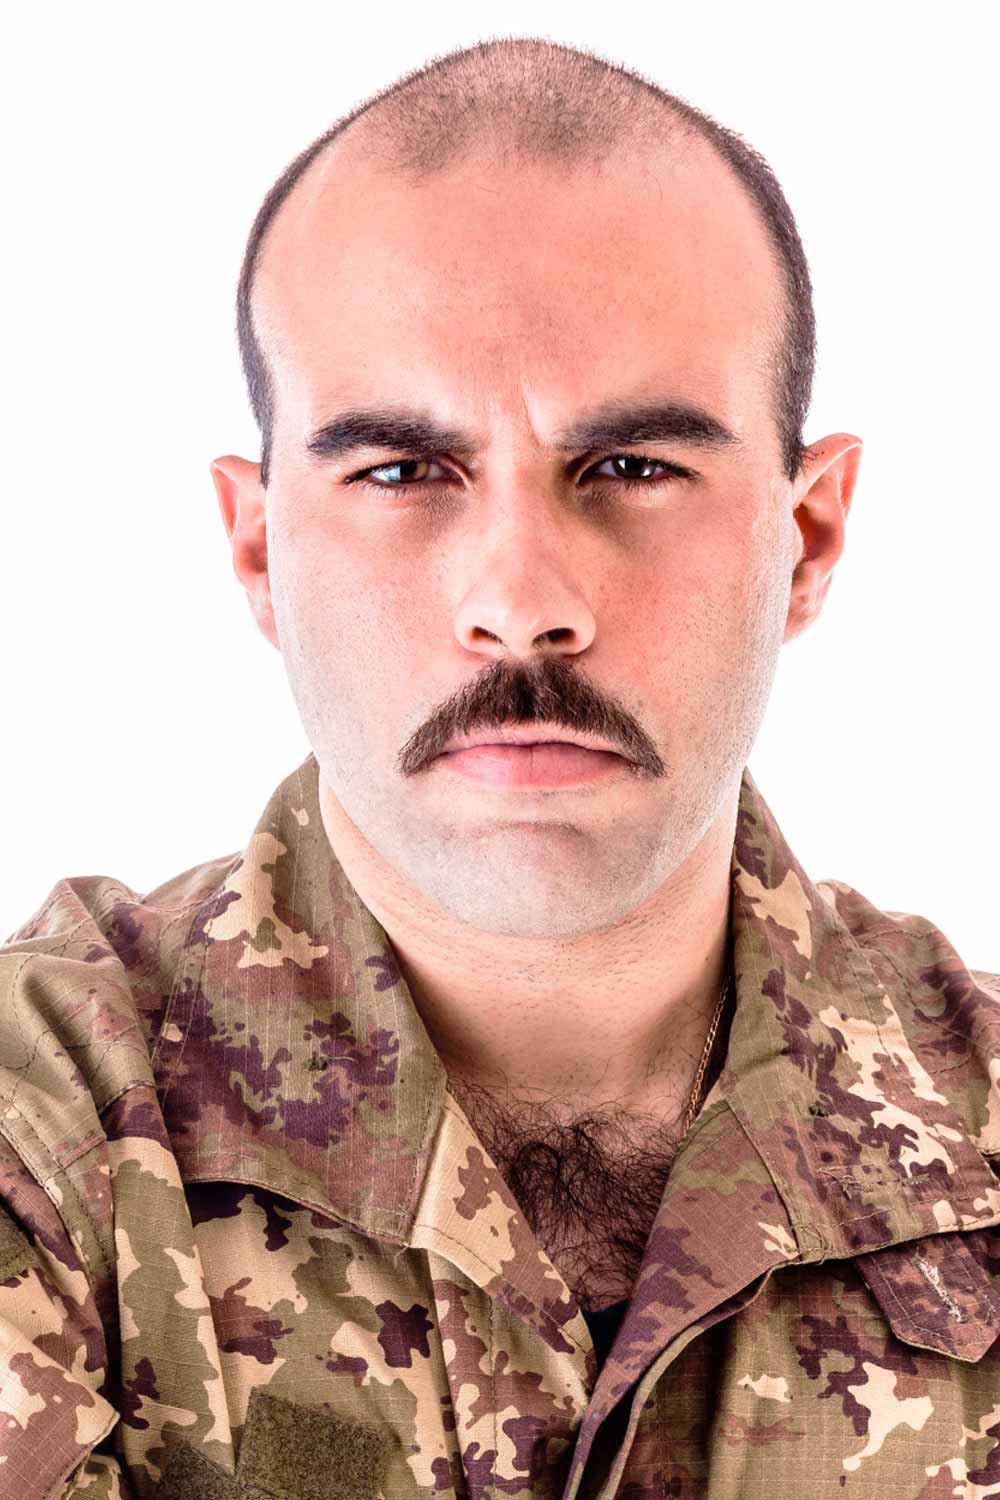 Military Mustache #mustache #moustache #mustachestyles #mustaches